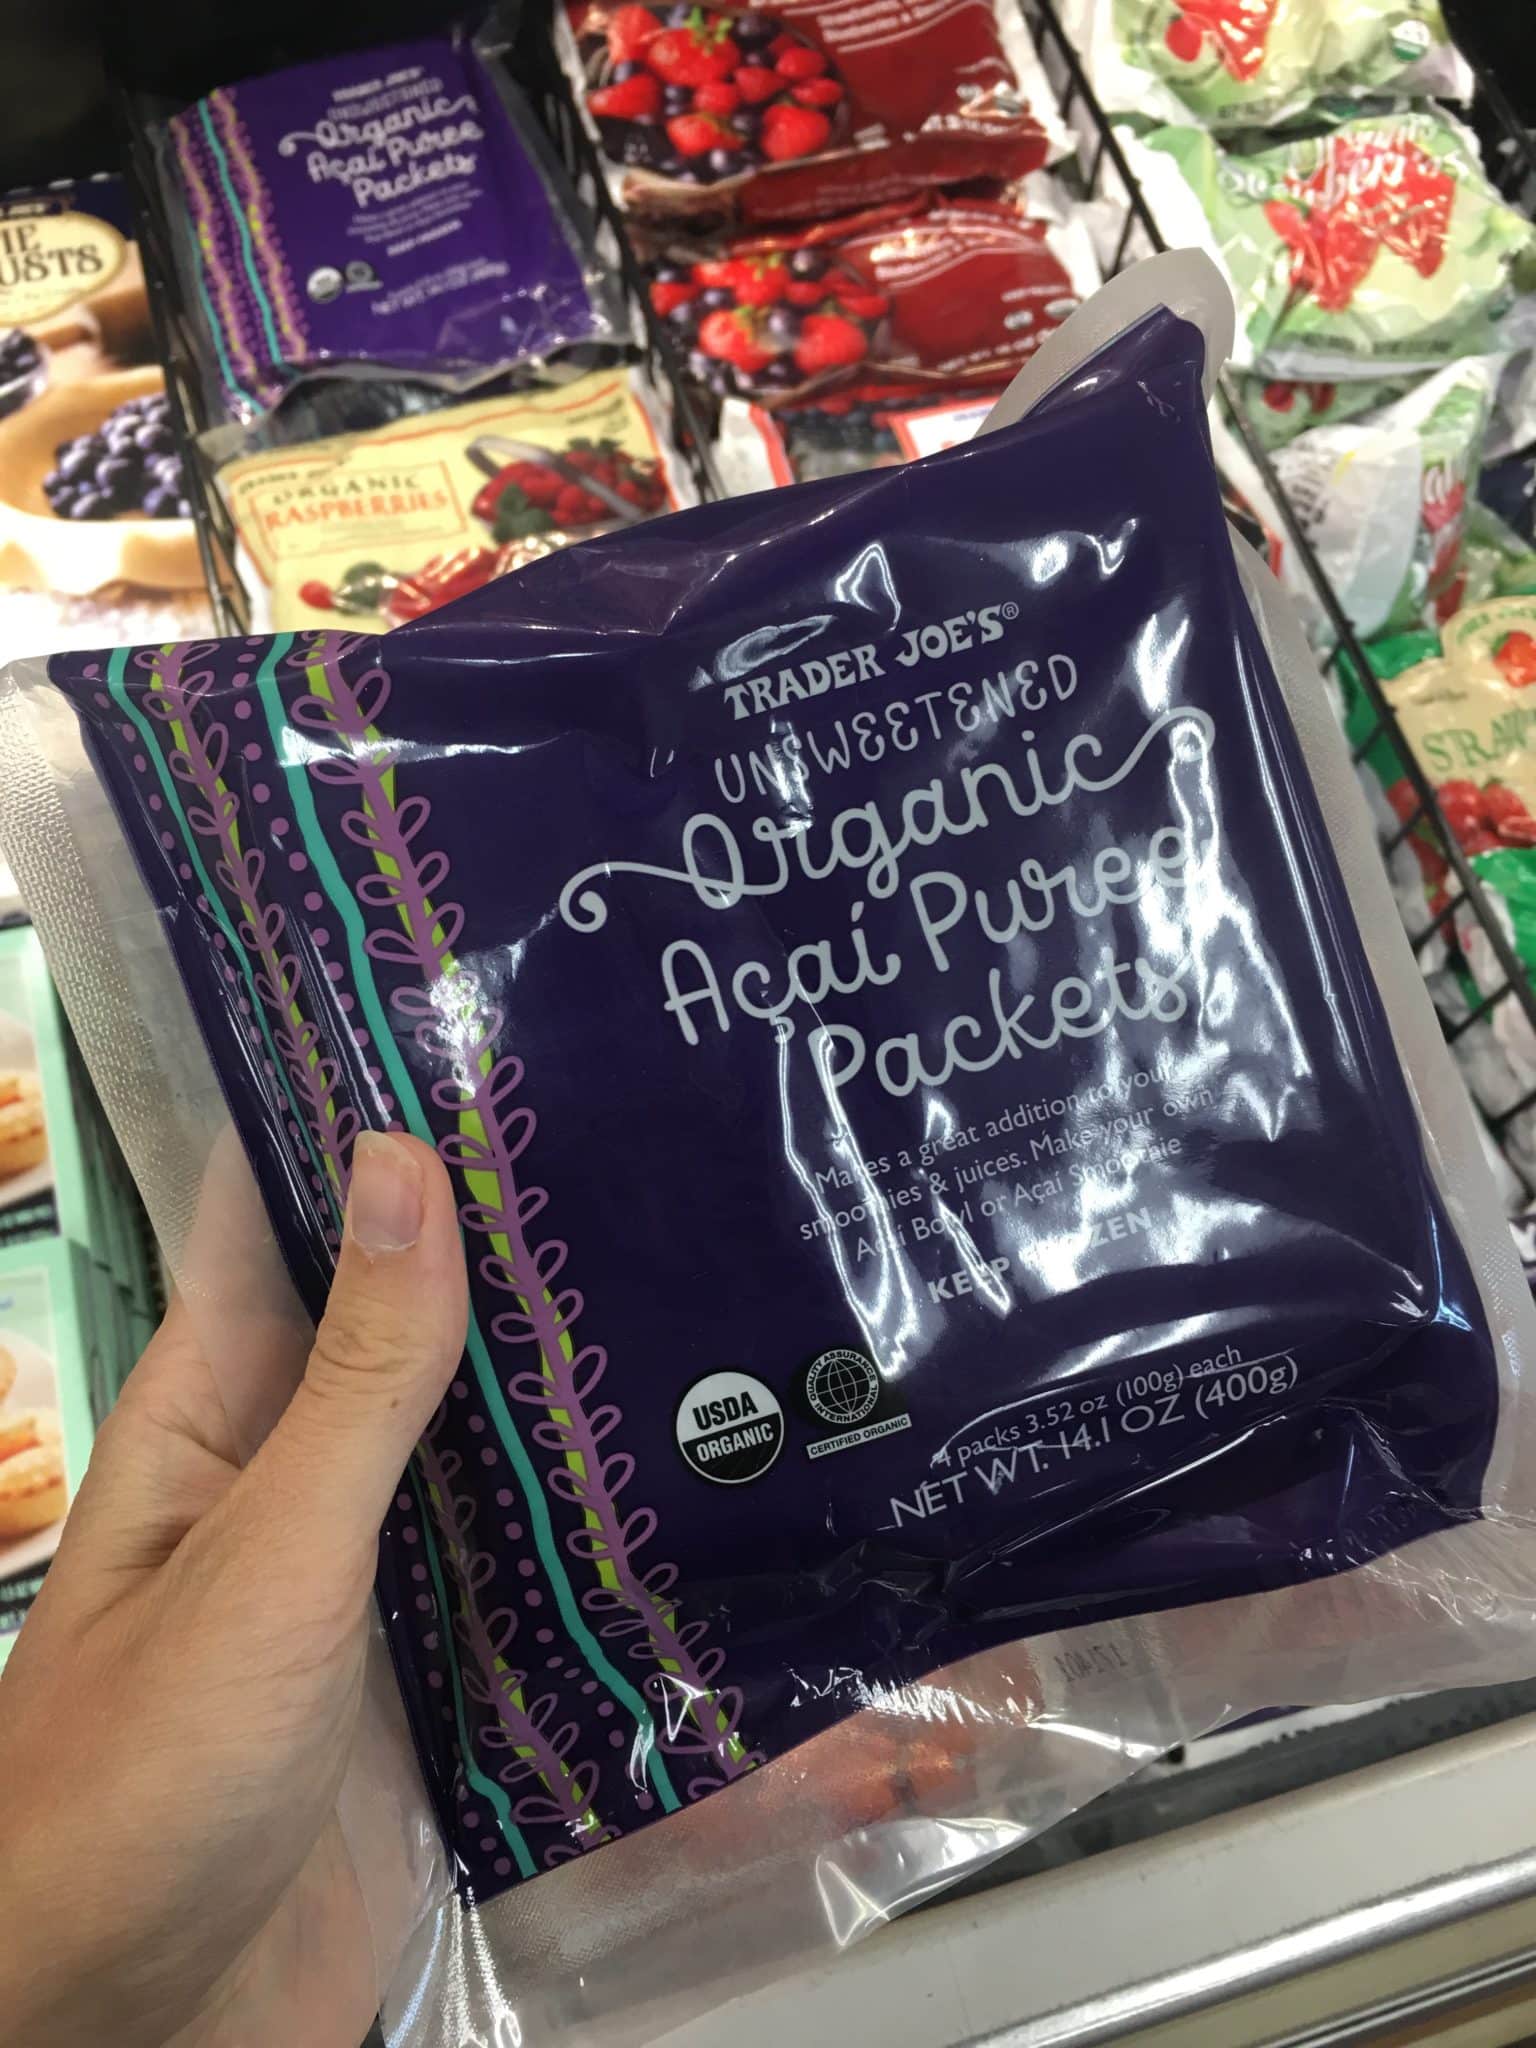 These are our favorite finds from Trader Joe's based on price, taste and healthiness!